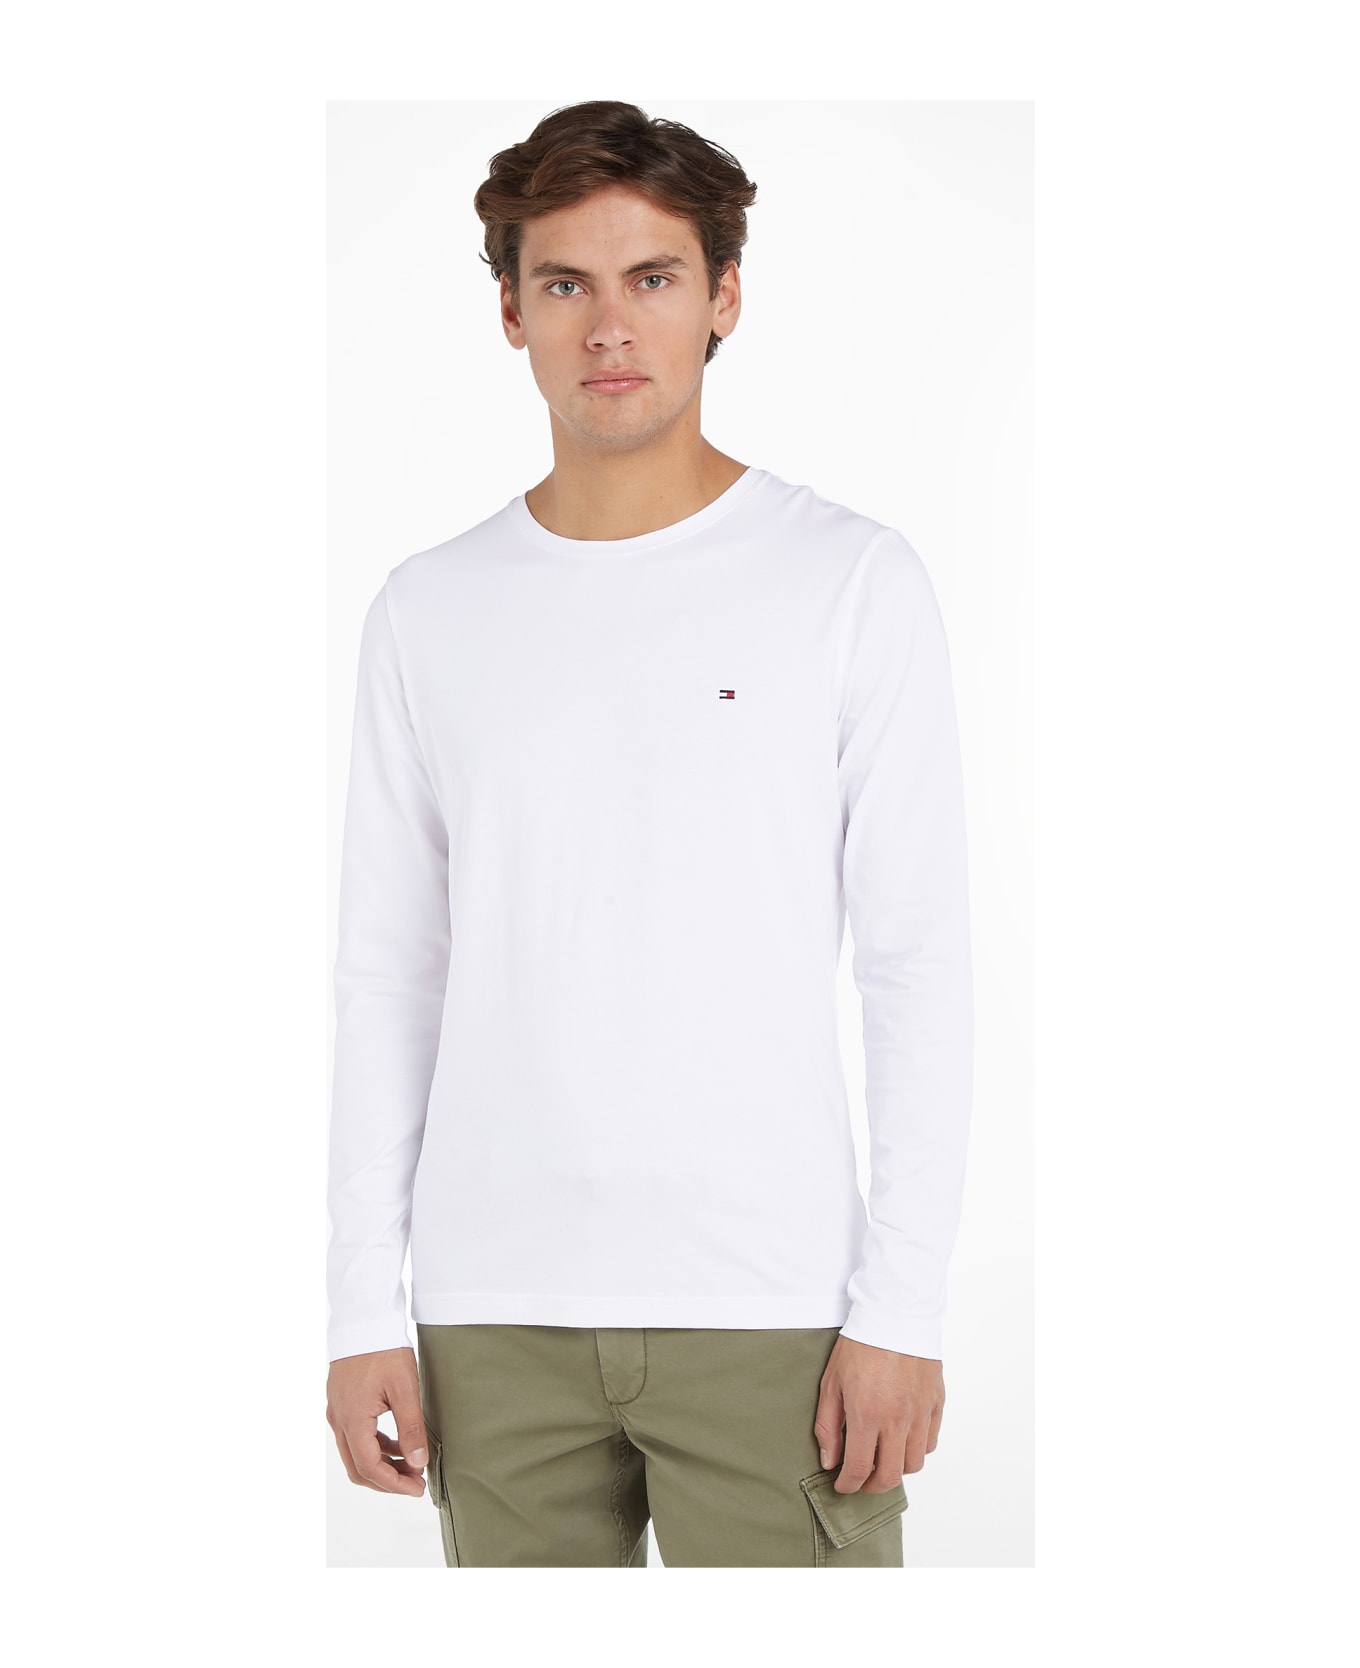 Tommy Hilfiger White Long-sleeved Shirt With Logo - WHITE